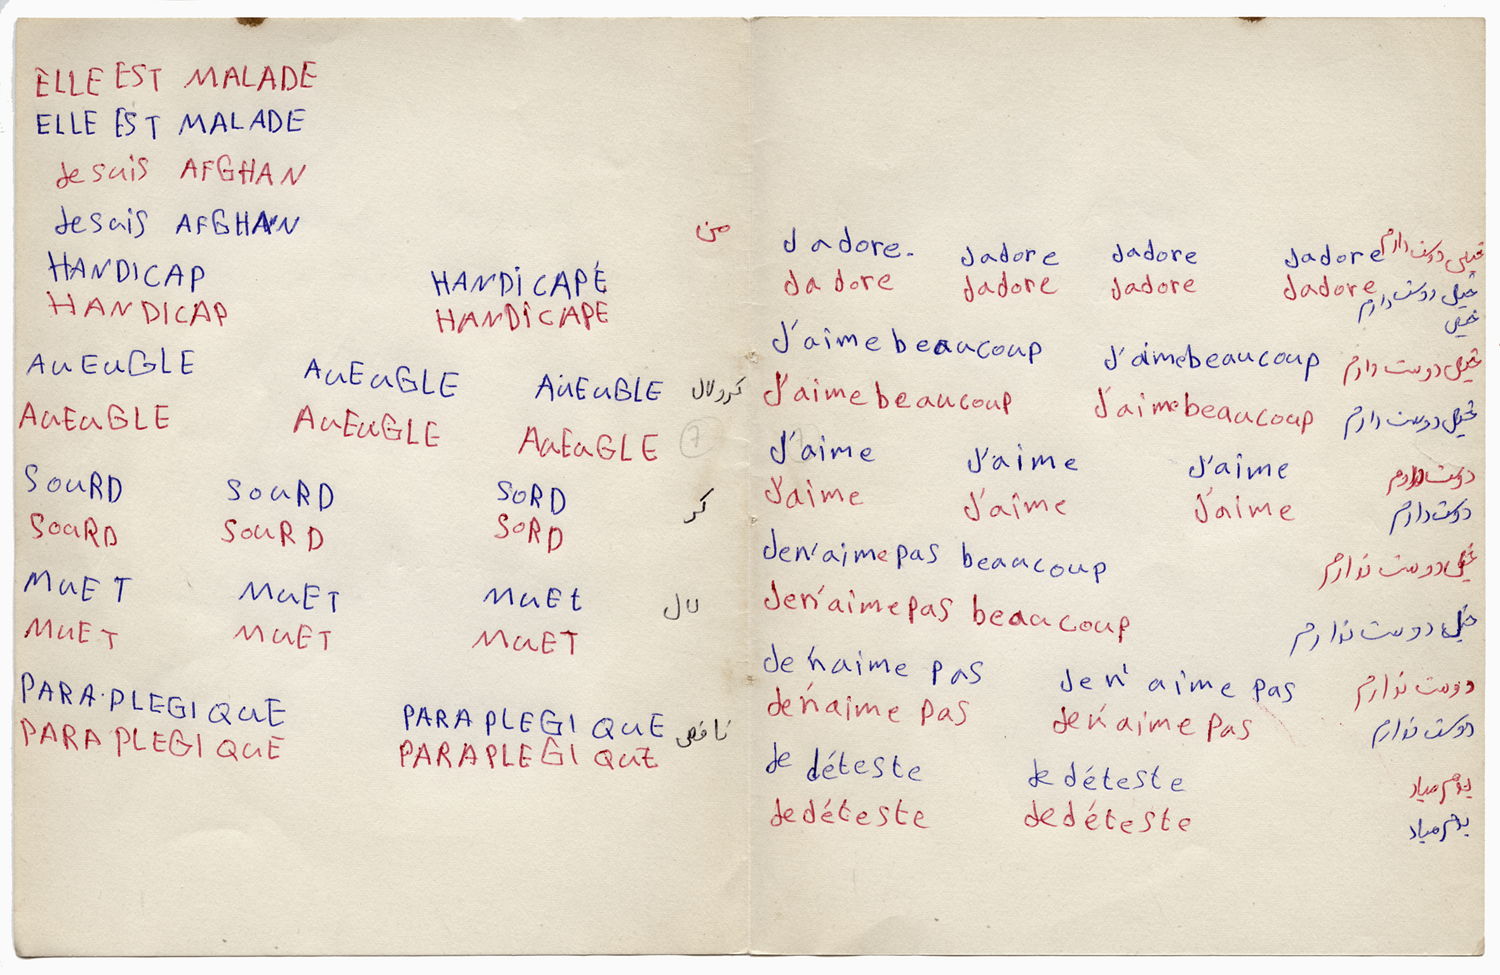 Notebook Mansour used to learn french, Afghan notebook collection, 2009 - 2010, 25 x 36 cm © National Museum of Immigration History, Paris